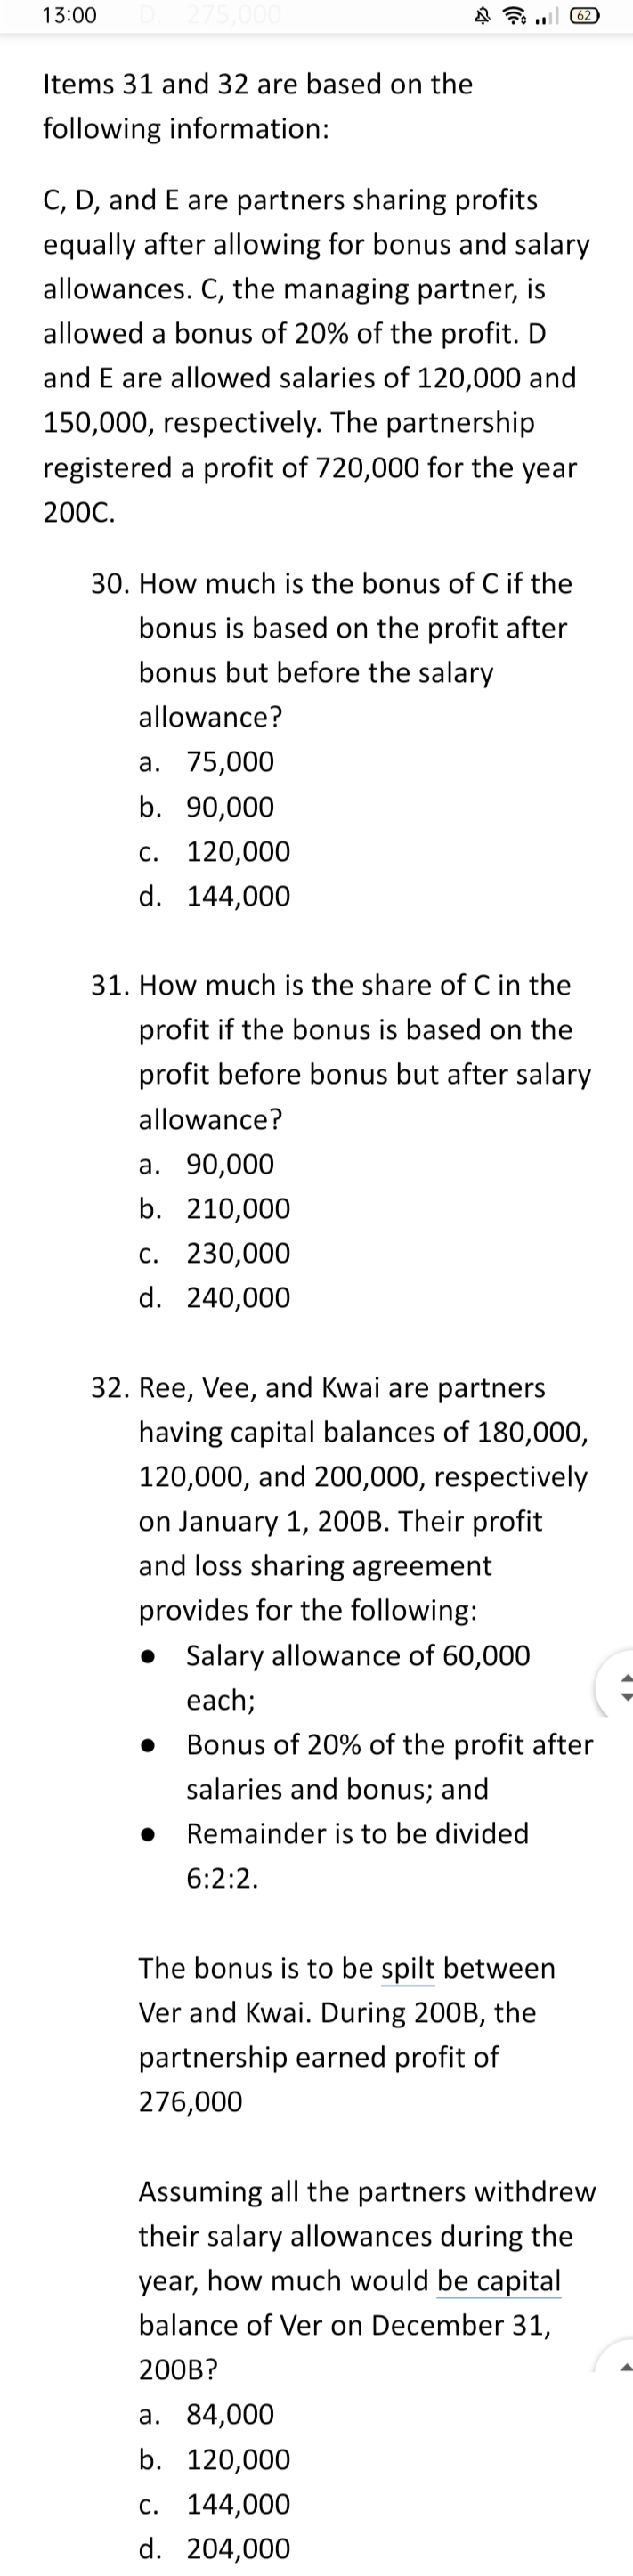 13:00
275,000
(62
Items 31 and 32 are based on the
following information:
C, D, and E are partners sharing profits
equally after allowing for bonus and salary
allowances. C, the managing partner, is
allowed a bonus of 20% of the profit. D
and E are allowed salaries of 120,000 and
150,000, respectively. The partnership
registered a profit of 720,000 for the year
200C.
30. How much is the bonus of C if the
bonus is based on the profit after
bonus but before the salary
allowance?
а. 75,000
b. 90,000
C. 120,000
d. 144,000
31. How much is the share of C in the
profit if the bonus is based on the
profit before bonus but after salary
allowance?
а. 90,000
b. 210,000
с. 230,000
d. 240,000
32. Ree, Vee, and Kwai are partners
having capital balances of 180,000,
120,000, and 200,000, respectively
on January 1, 200B. Their profit
and loss sharing agreement
provides for the following:
• Salary allowance of 60,000
each;
Bonus of 20% of the profit after
salaries and bonus; and
Remainder is to be divided
6:2:2.
The bonus is to be spilt between
Ver and Kwai. During 200B, the
partnership earned profit of
276,000
Assuming all the partners withdrew
their salary allowances during the
year, how much would be capital
balance of Ver on December 31,
200B?
а. 84,000
b. 120,000
C. 144,000
d. 204,000
